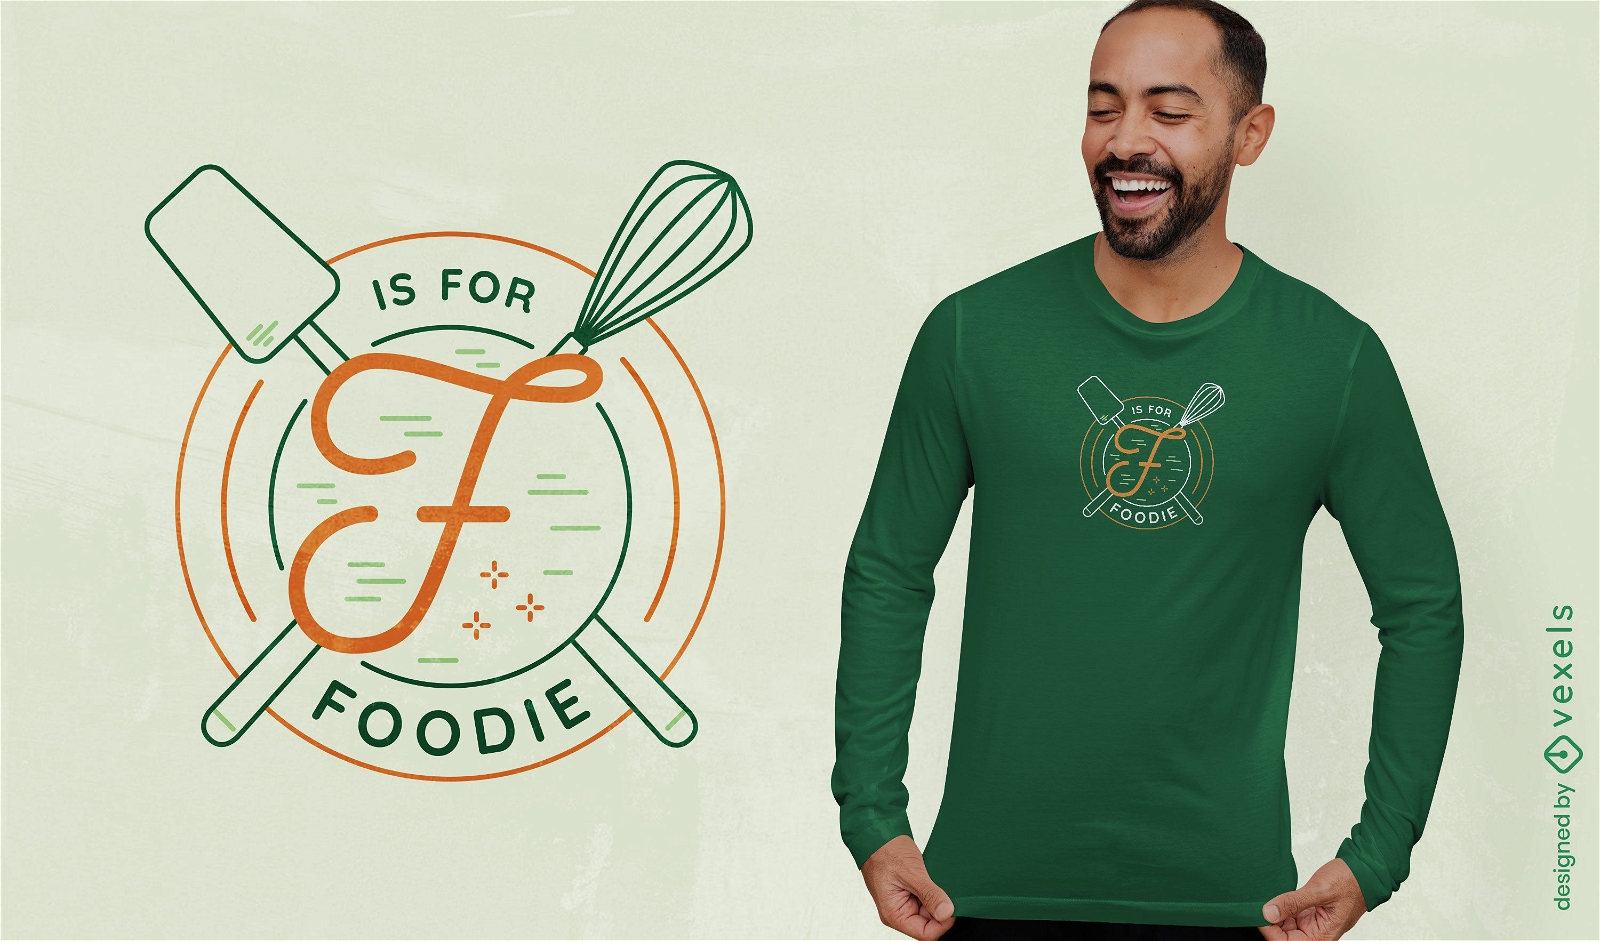 Foodie cooking quote t-shirt design